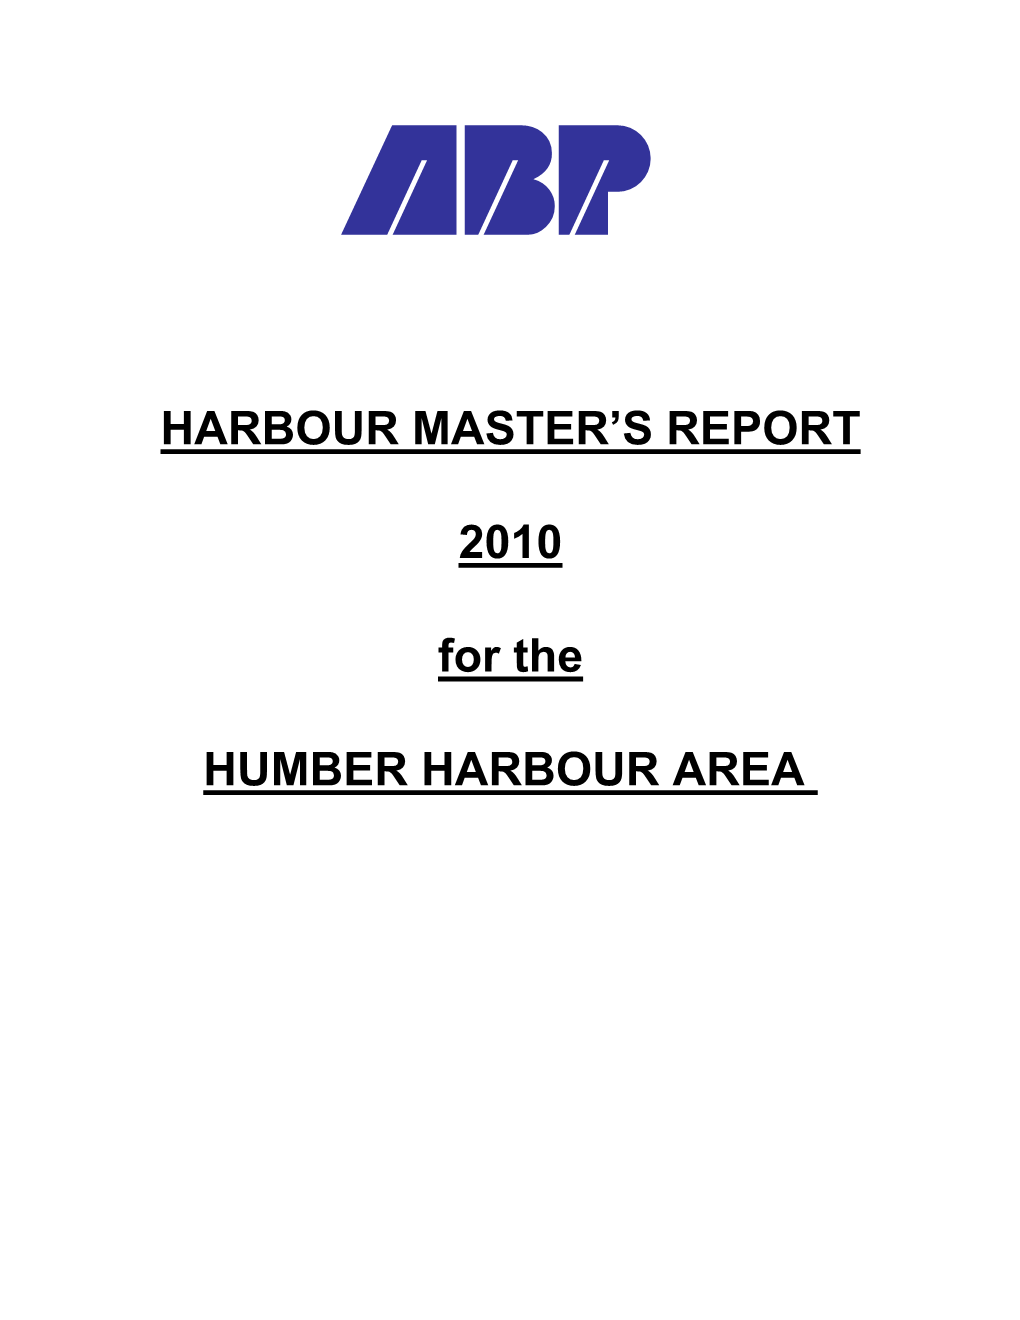 HARBOUR MASTER's REPORT 2010 for the HUMBER HARBOUR AREA